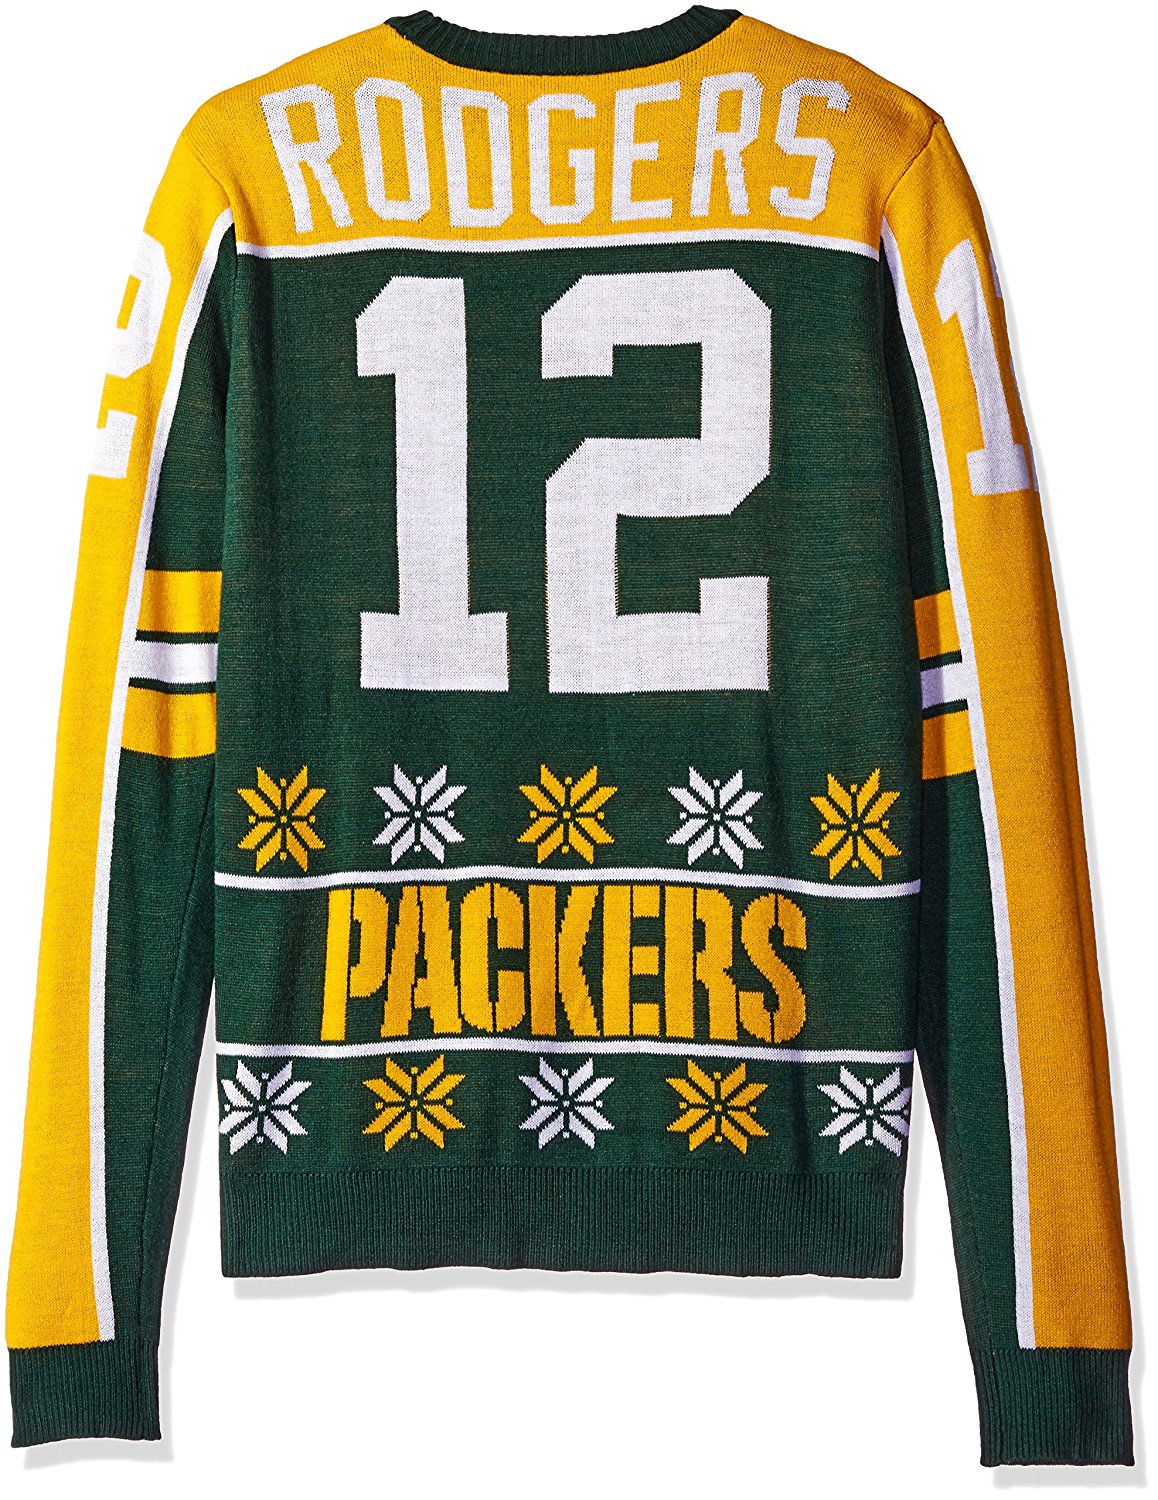 KLEW NFL Men's Green Bay Packers Aaron Rodgers #12 Ugly Sweater | eBay